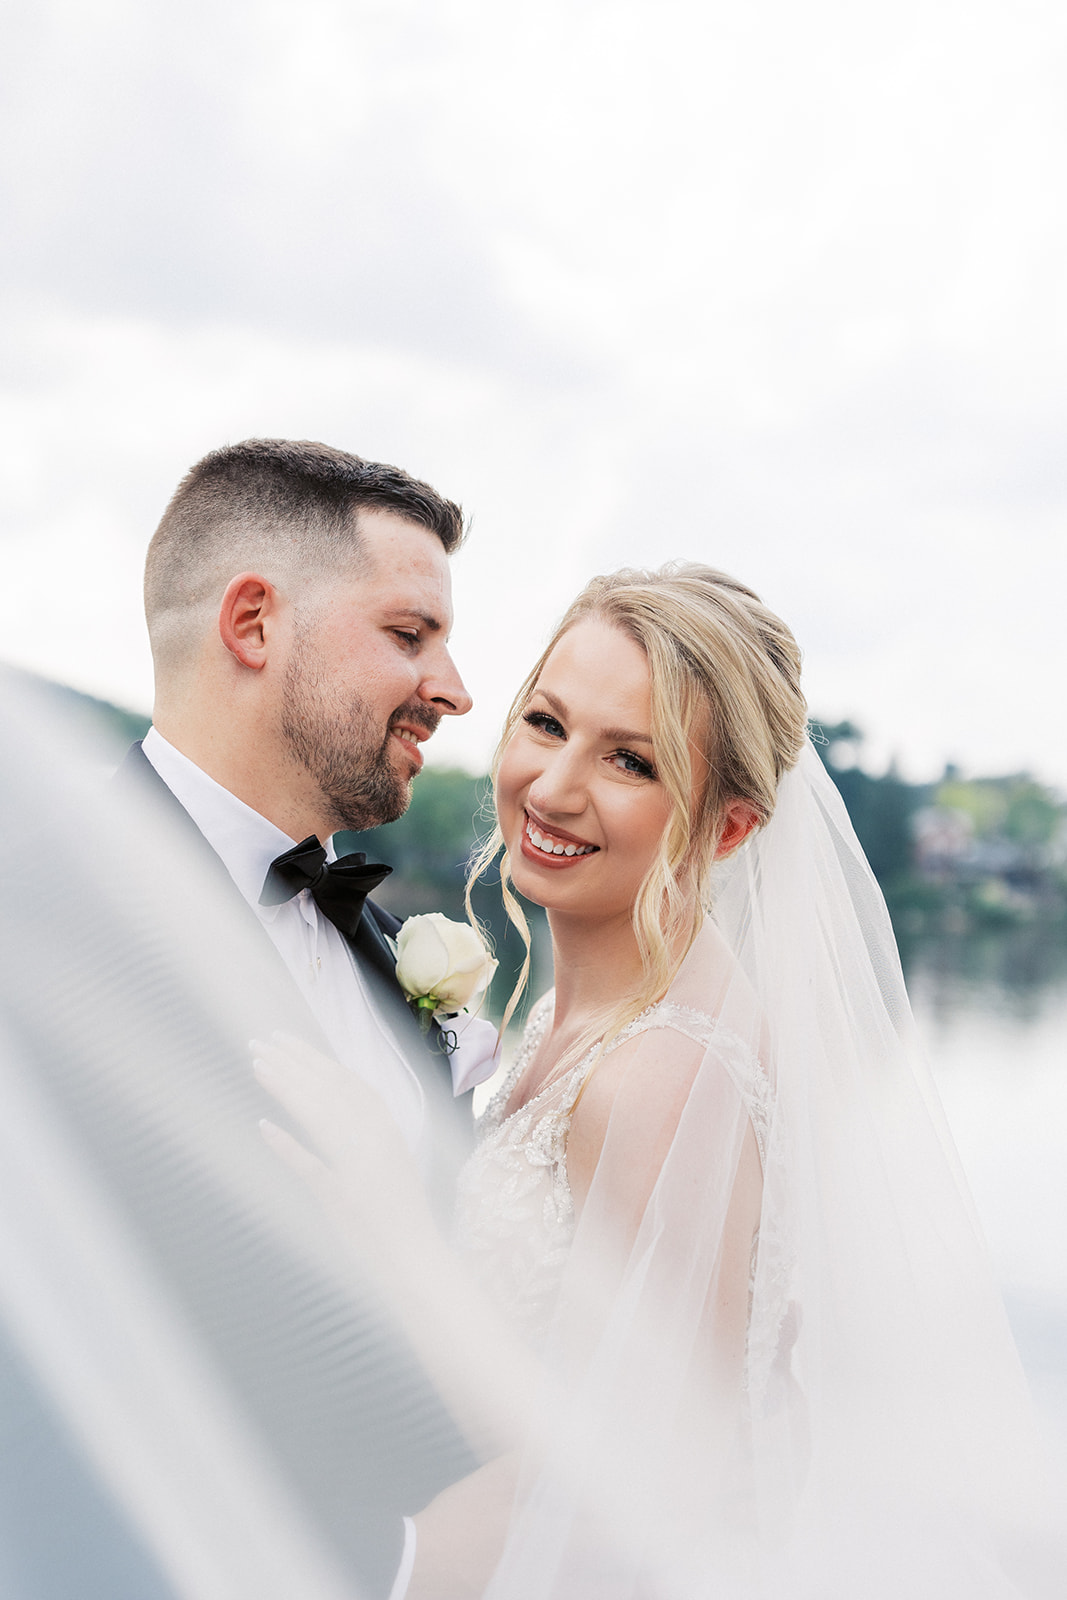 Newlyweds laugh while standing in a waterfront park as the veil blows in the wind around them